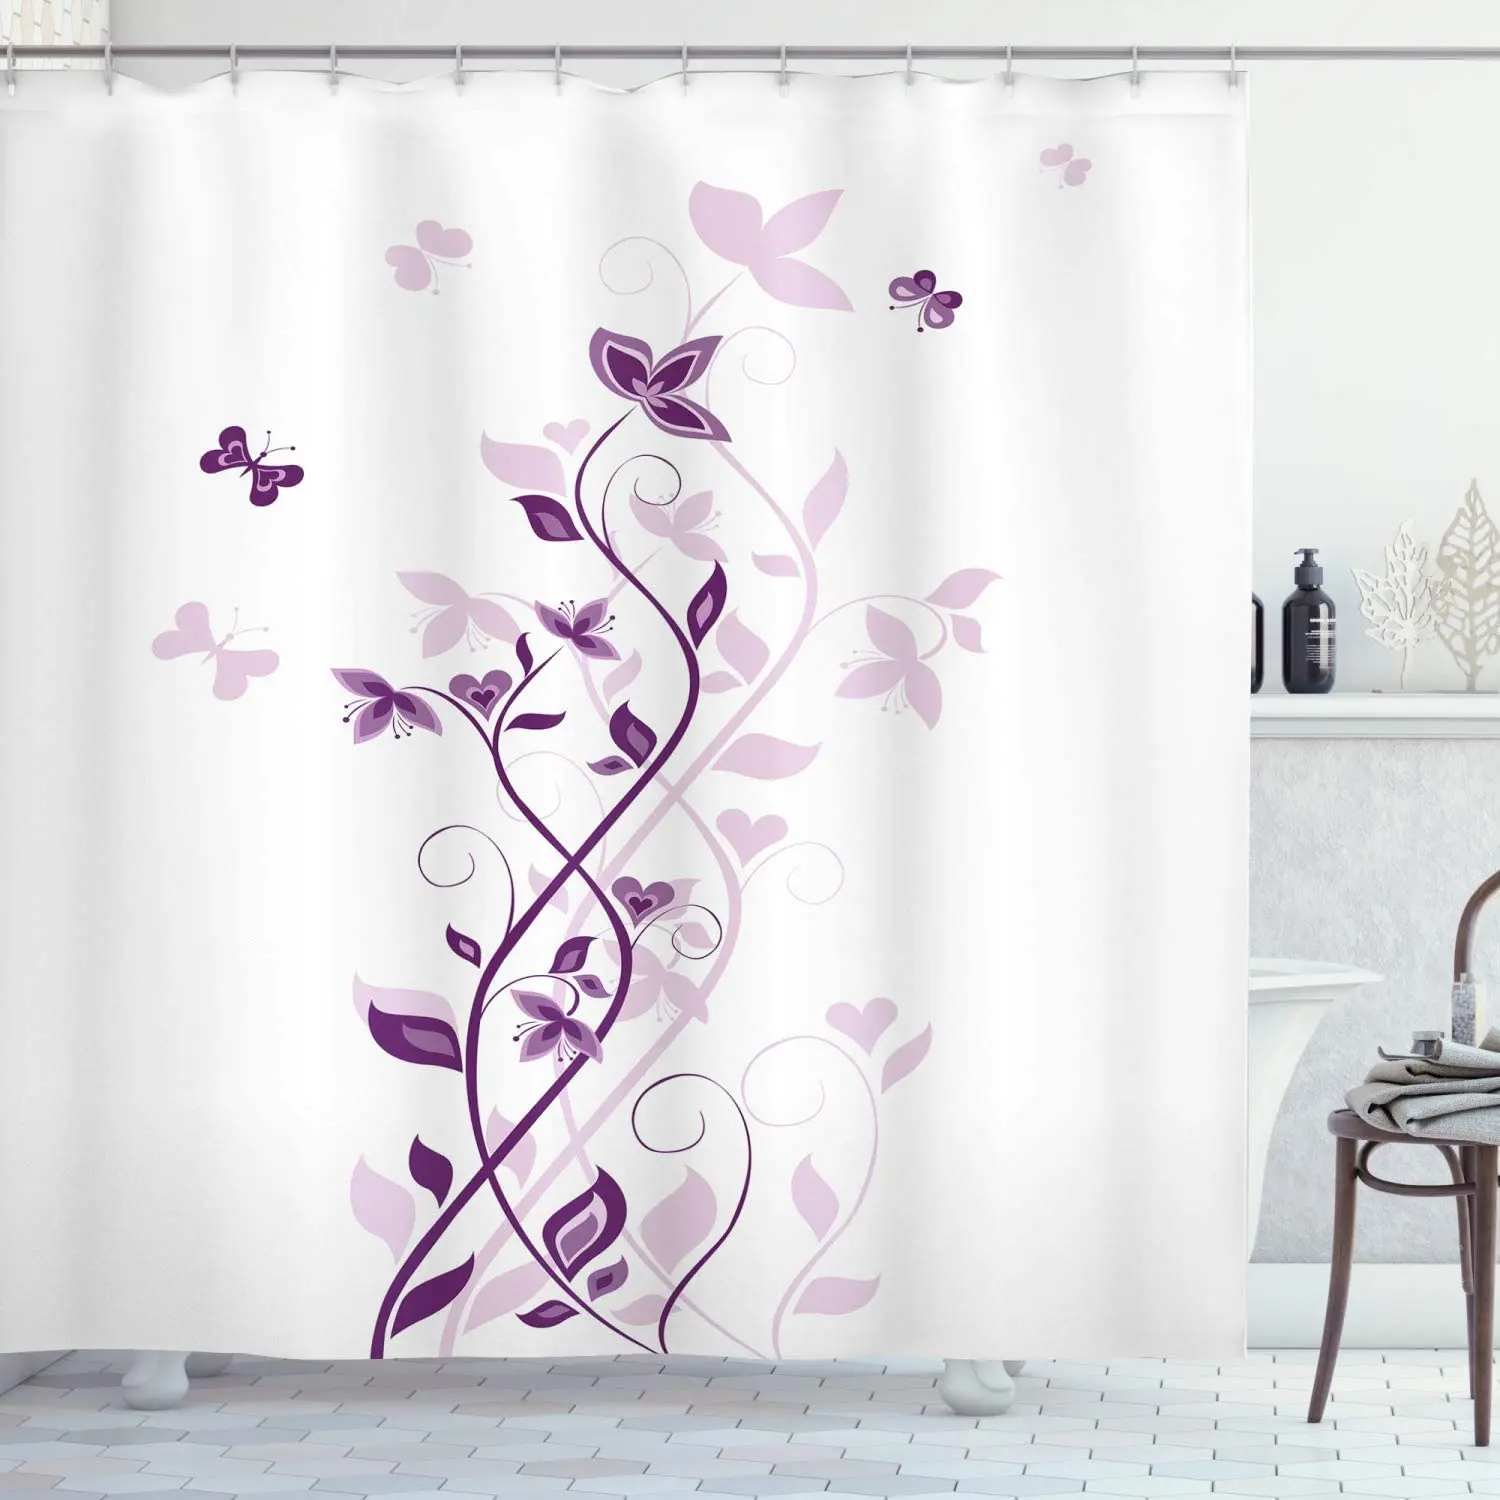 72" Butterfly Funny Dachshund Dog Polyester Waterproof Fabric Shower Curtain Set 